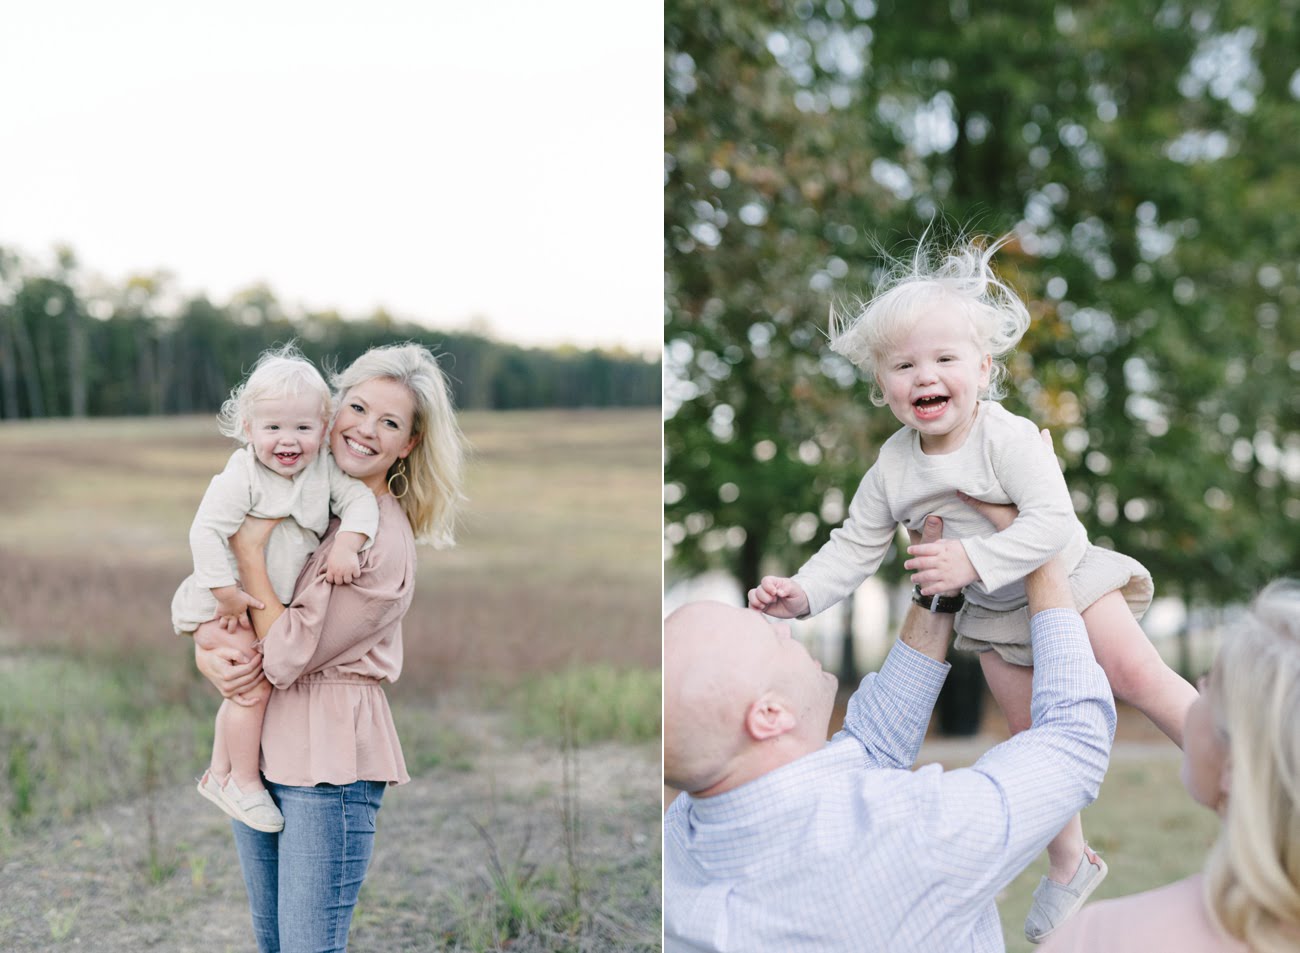 Toddler portraits with family at Moss Rock Preserve in Birmingham AL